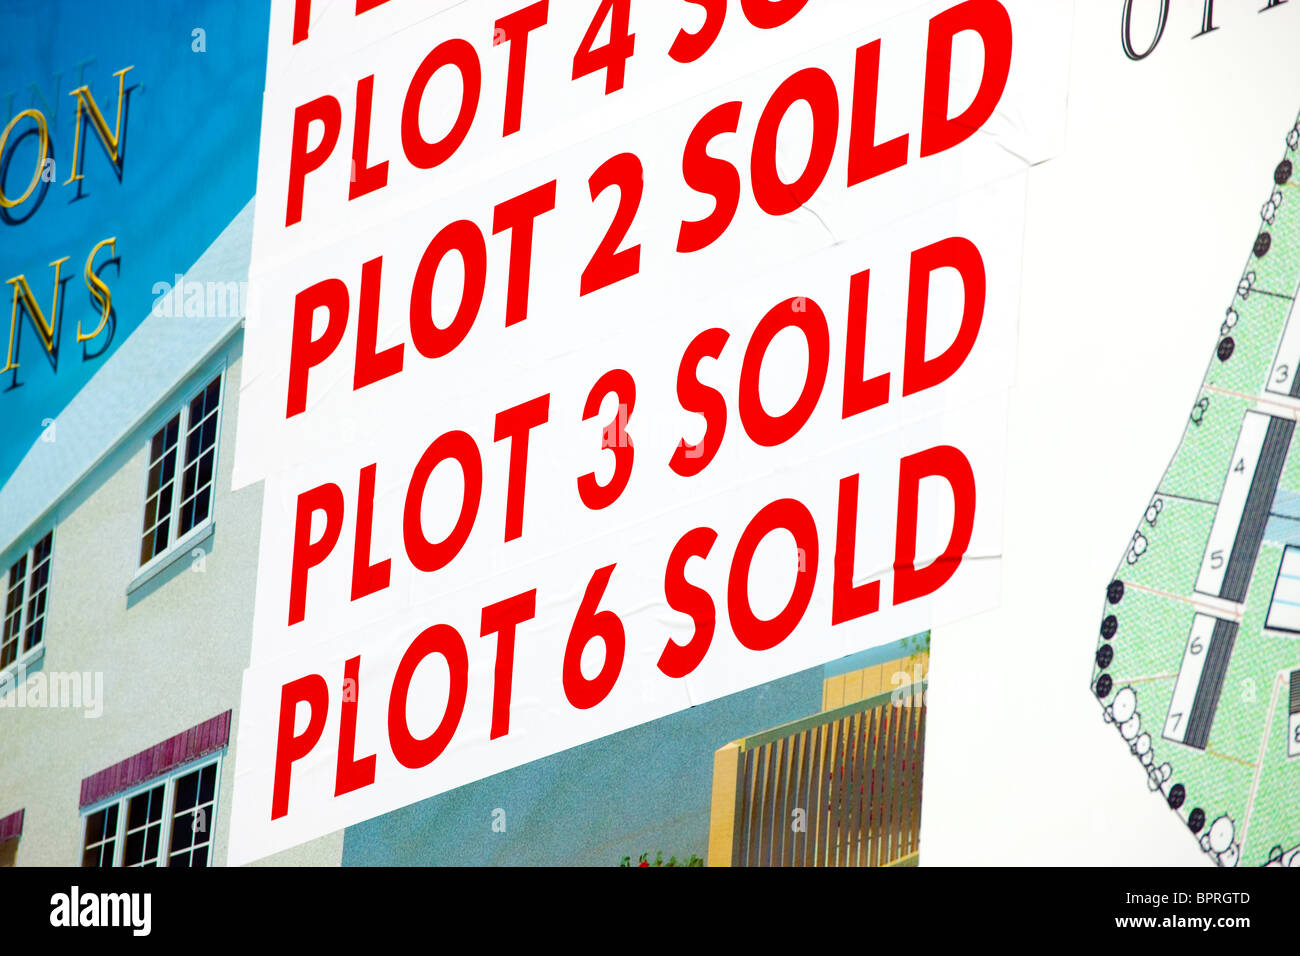 plots sold sign Stock Photo